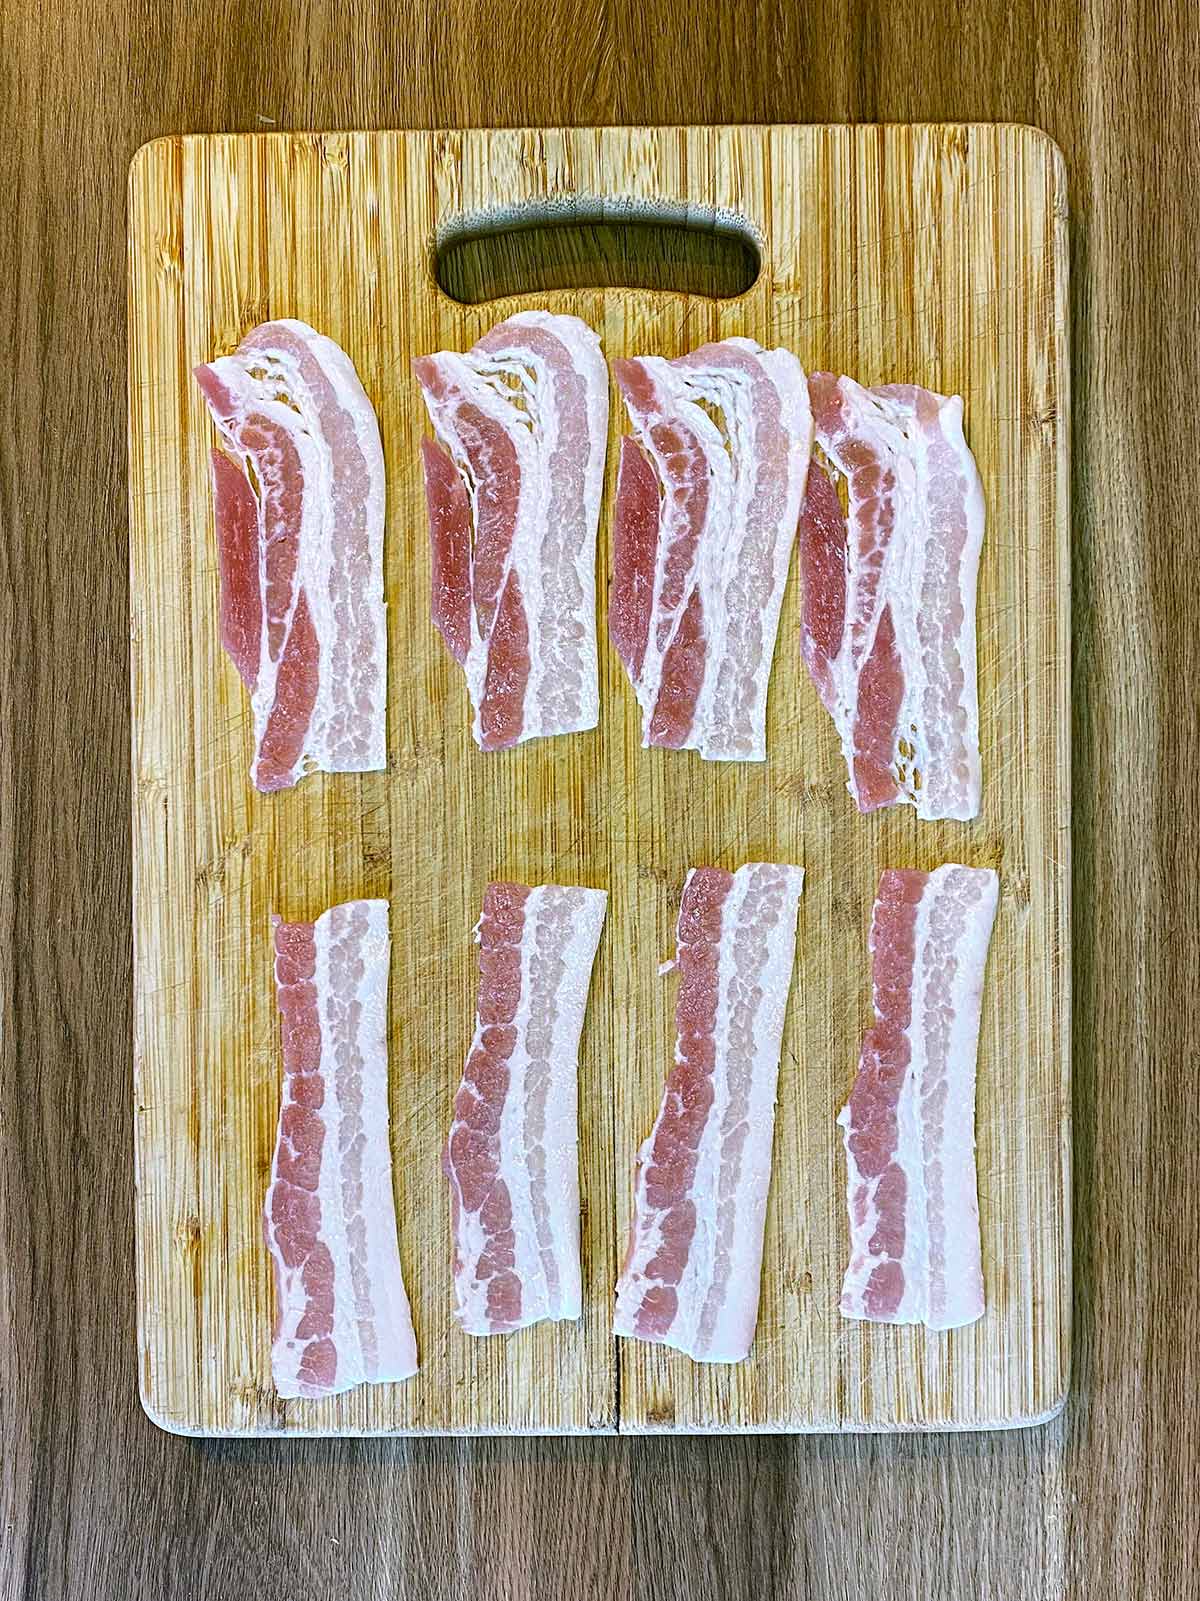 A chopping board with 4 rashers of bacon cut in half.